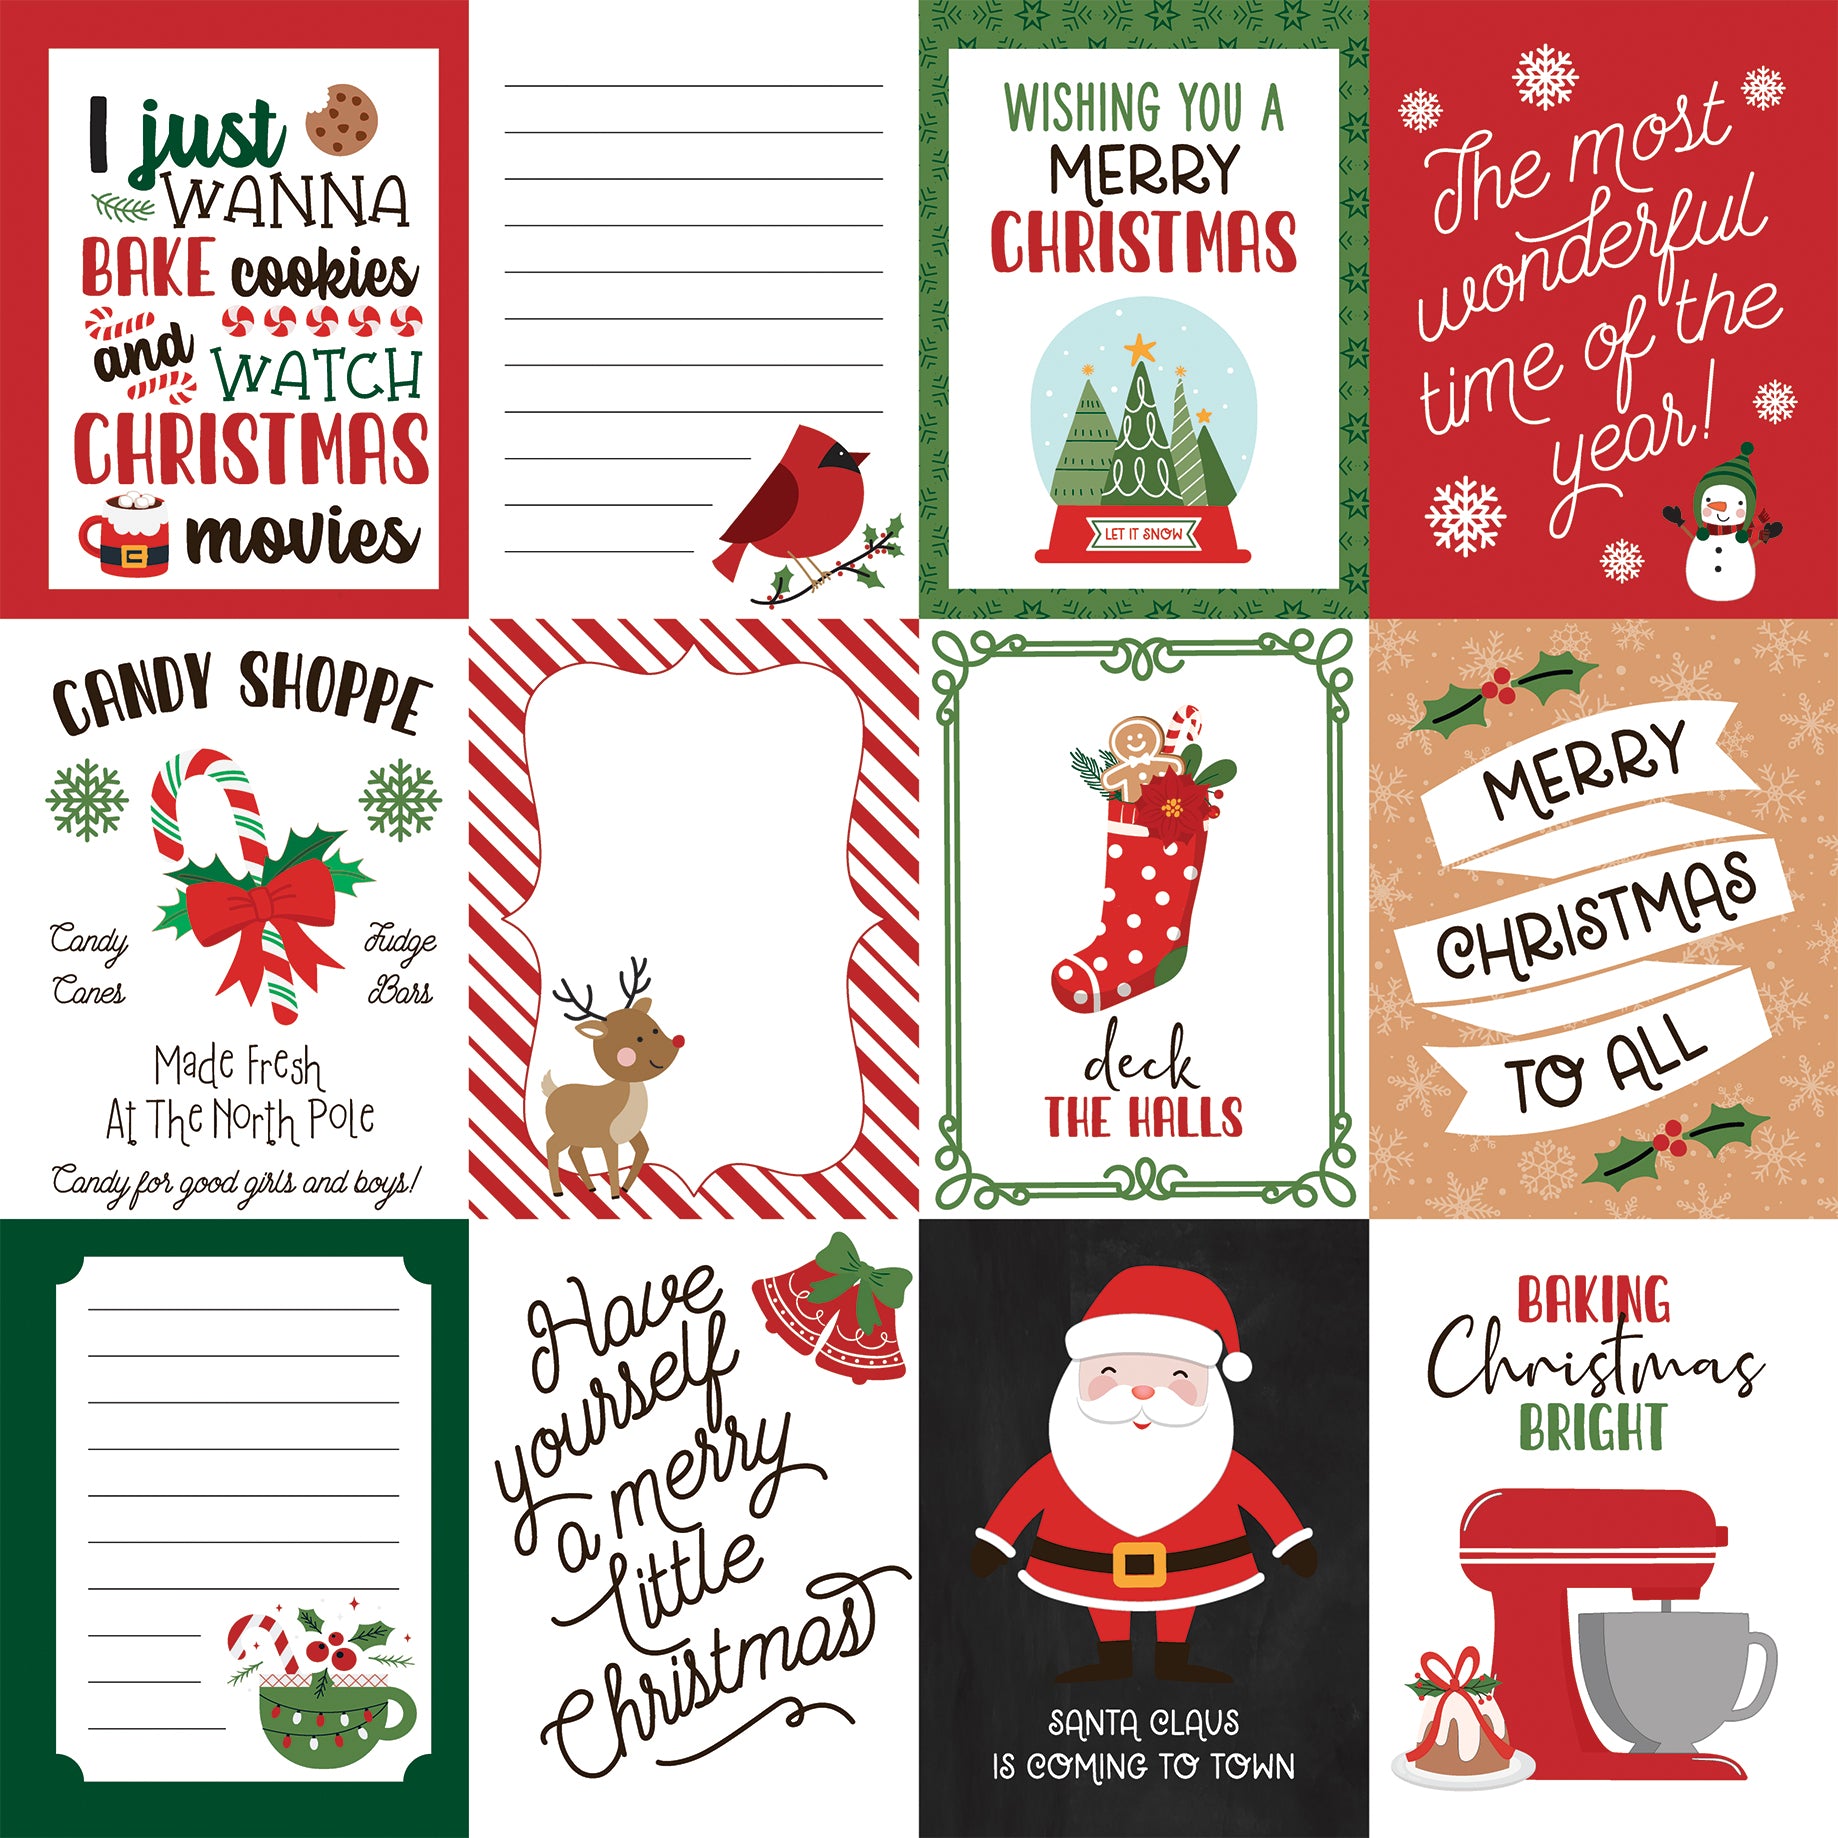 Have A Holly Jolly Christmas Collection 3x4 Journaling Cards 12 x 12 Double-Sided Scrapbook Paper by Echo Park Paper